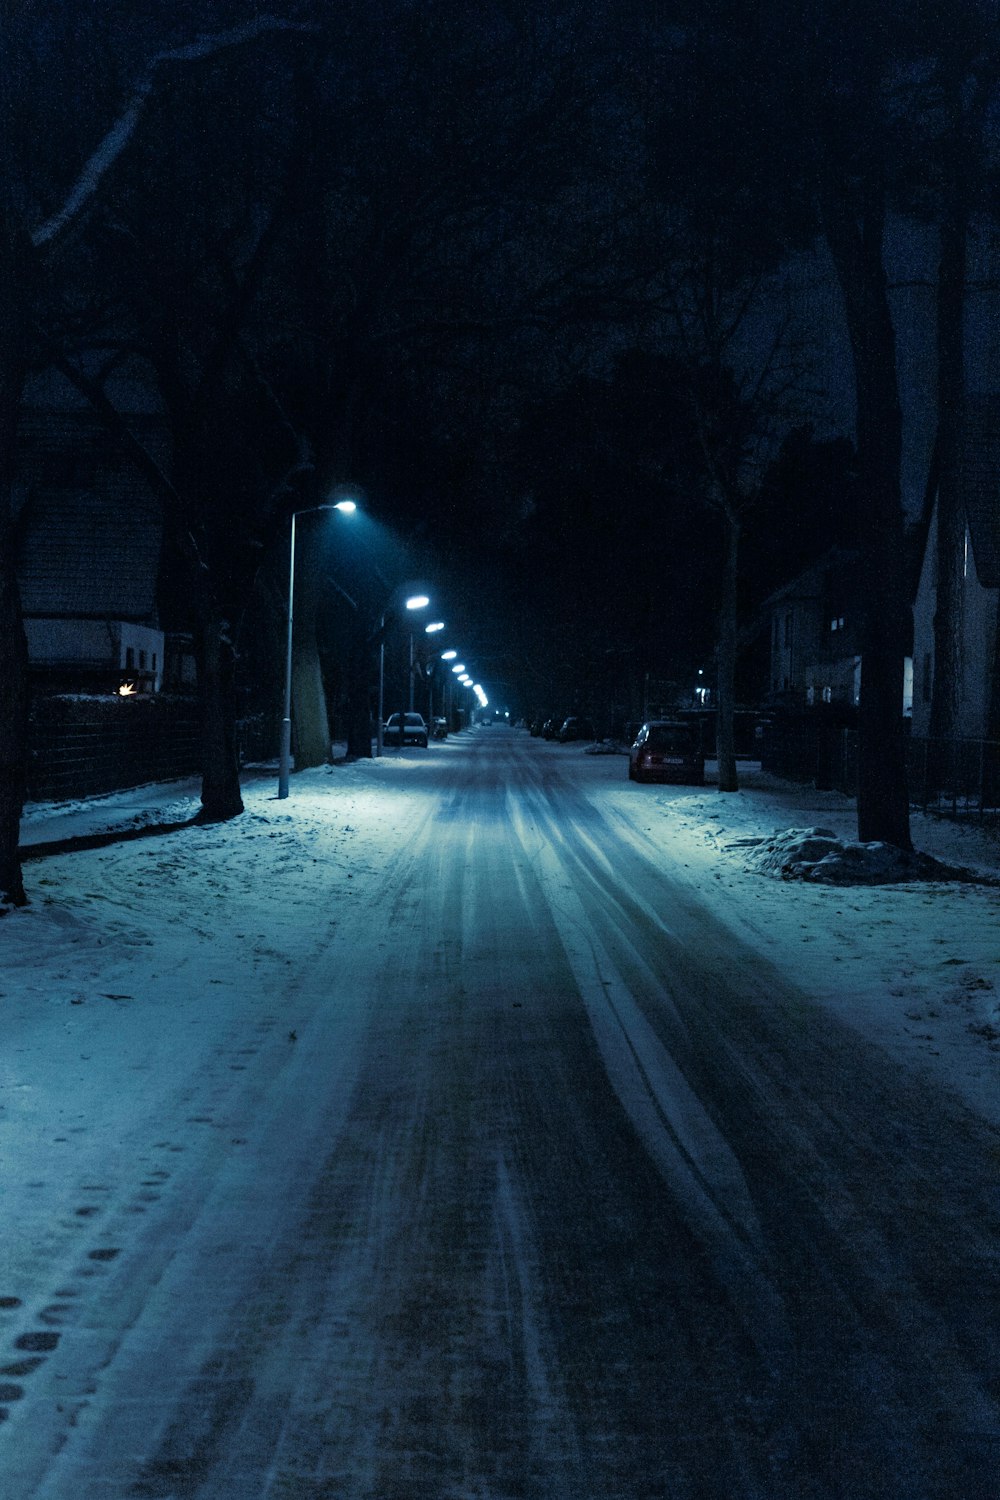 a snowy street at night with street lights on